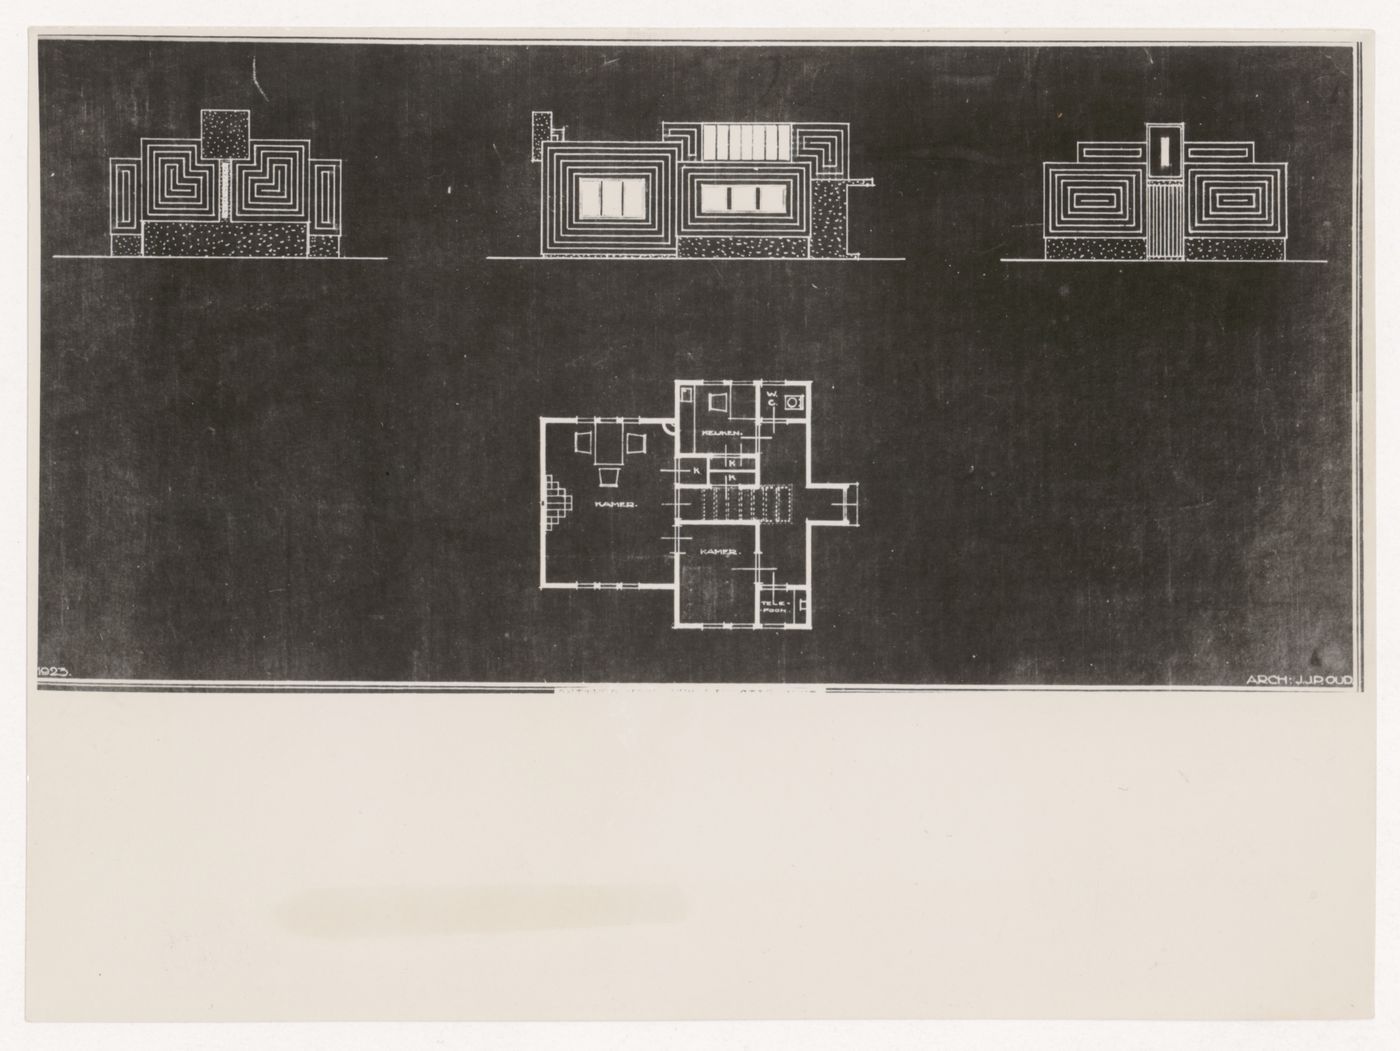 Photograph of a plan and elevations for the temporary construction administration building, Oud-Mathenesse Quarter, Rotterdam, Netherlands